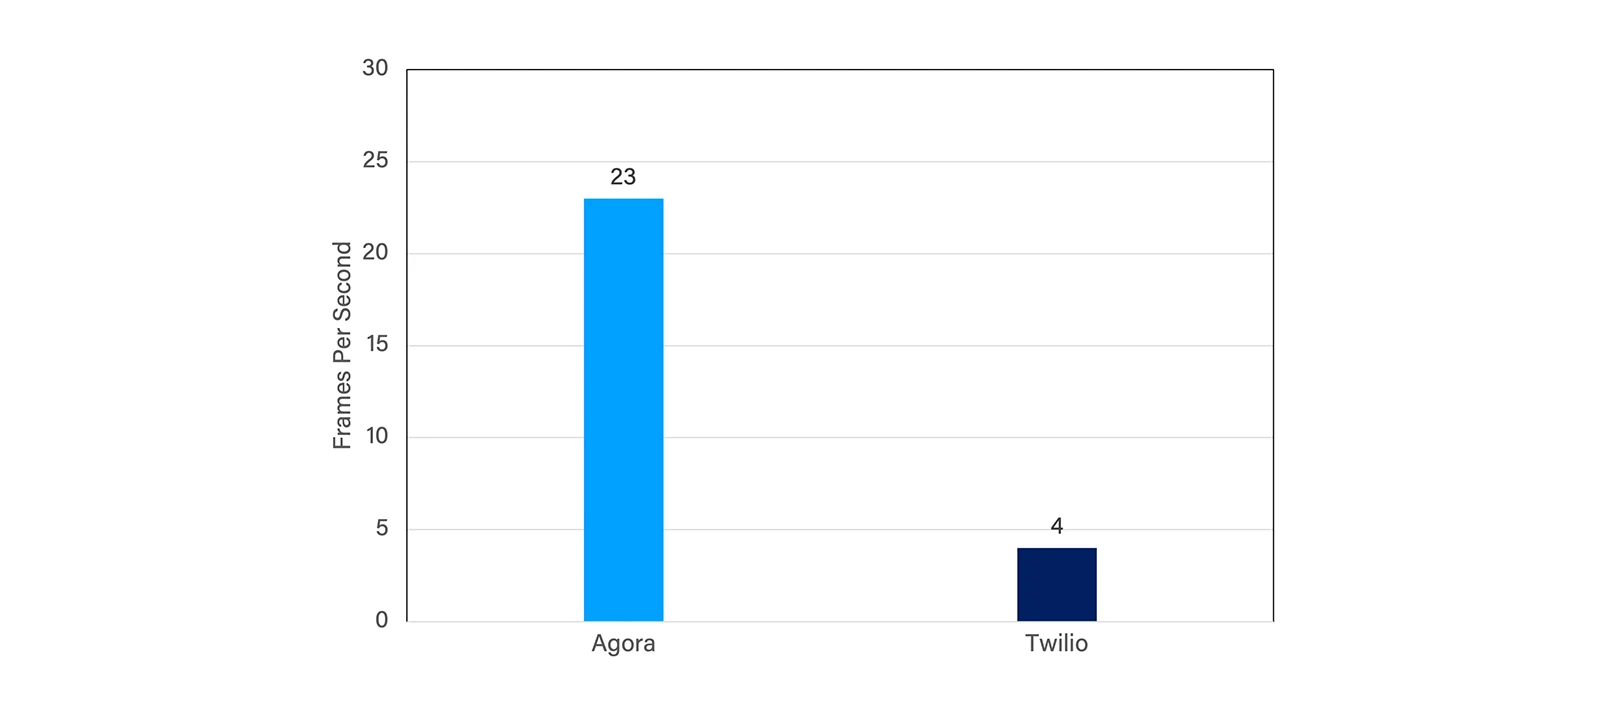 Figure 3: FPS comparison for Agora and Twilio with network having downlink packet loss of 25%.